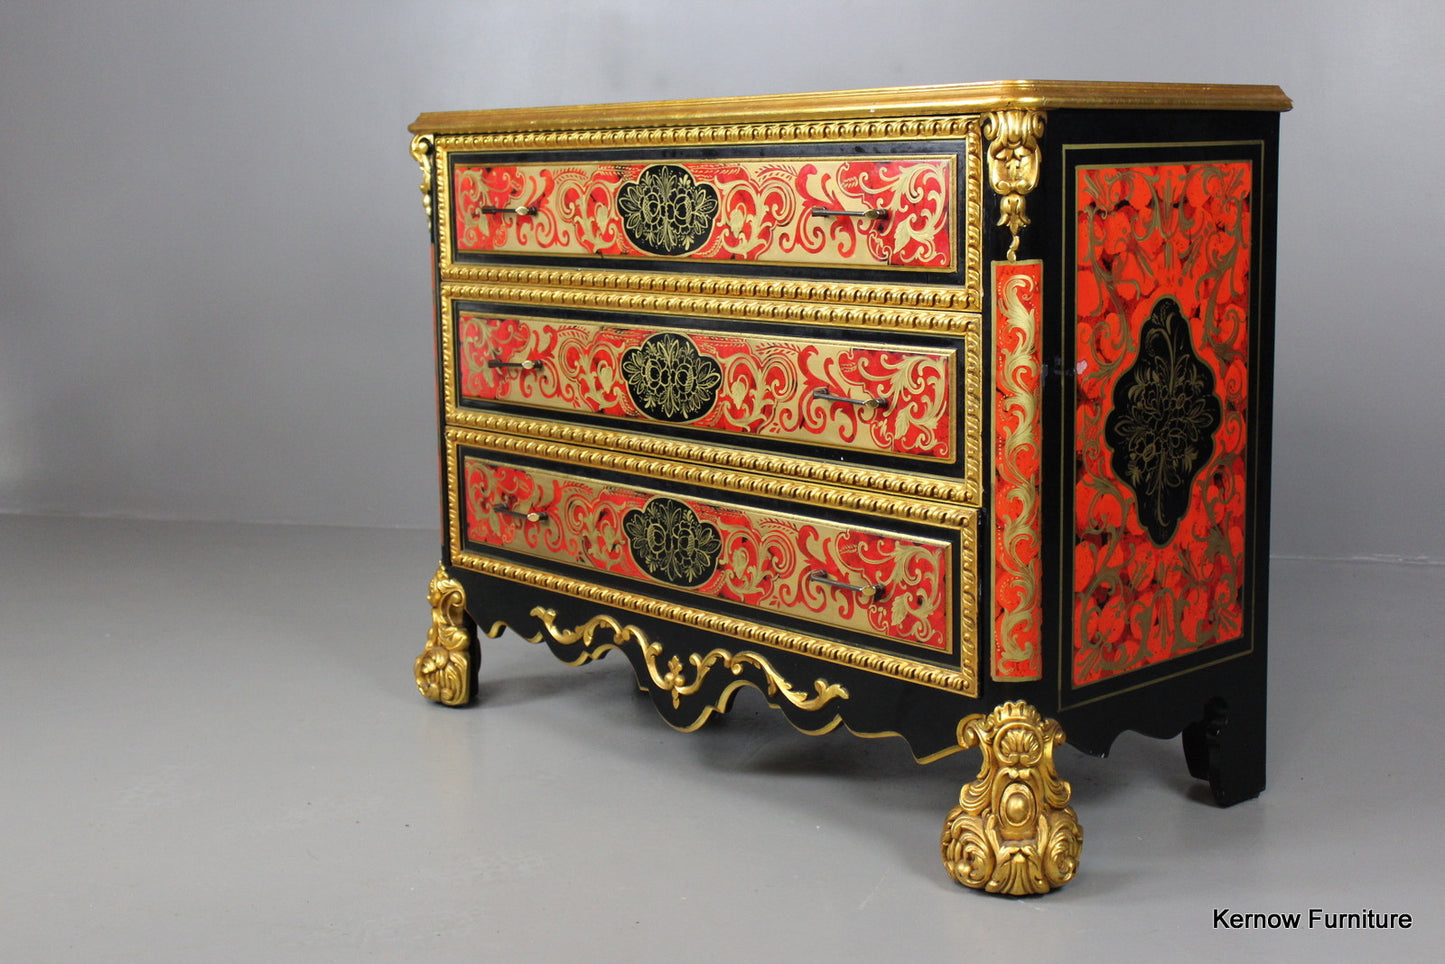 Ornate Handpainted Gilt Chest of Drawers - Kernow Furniture